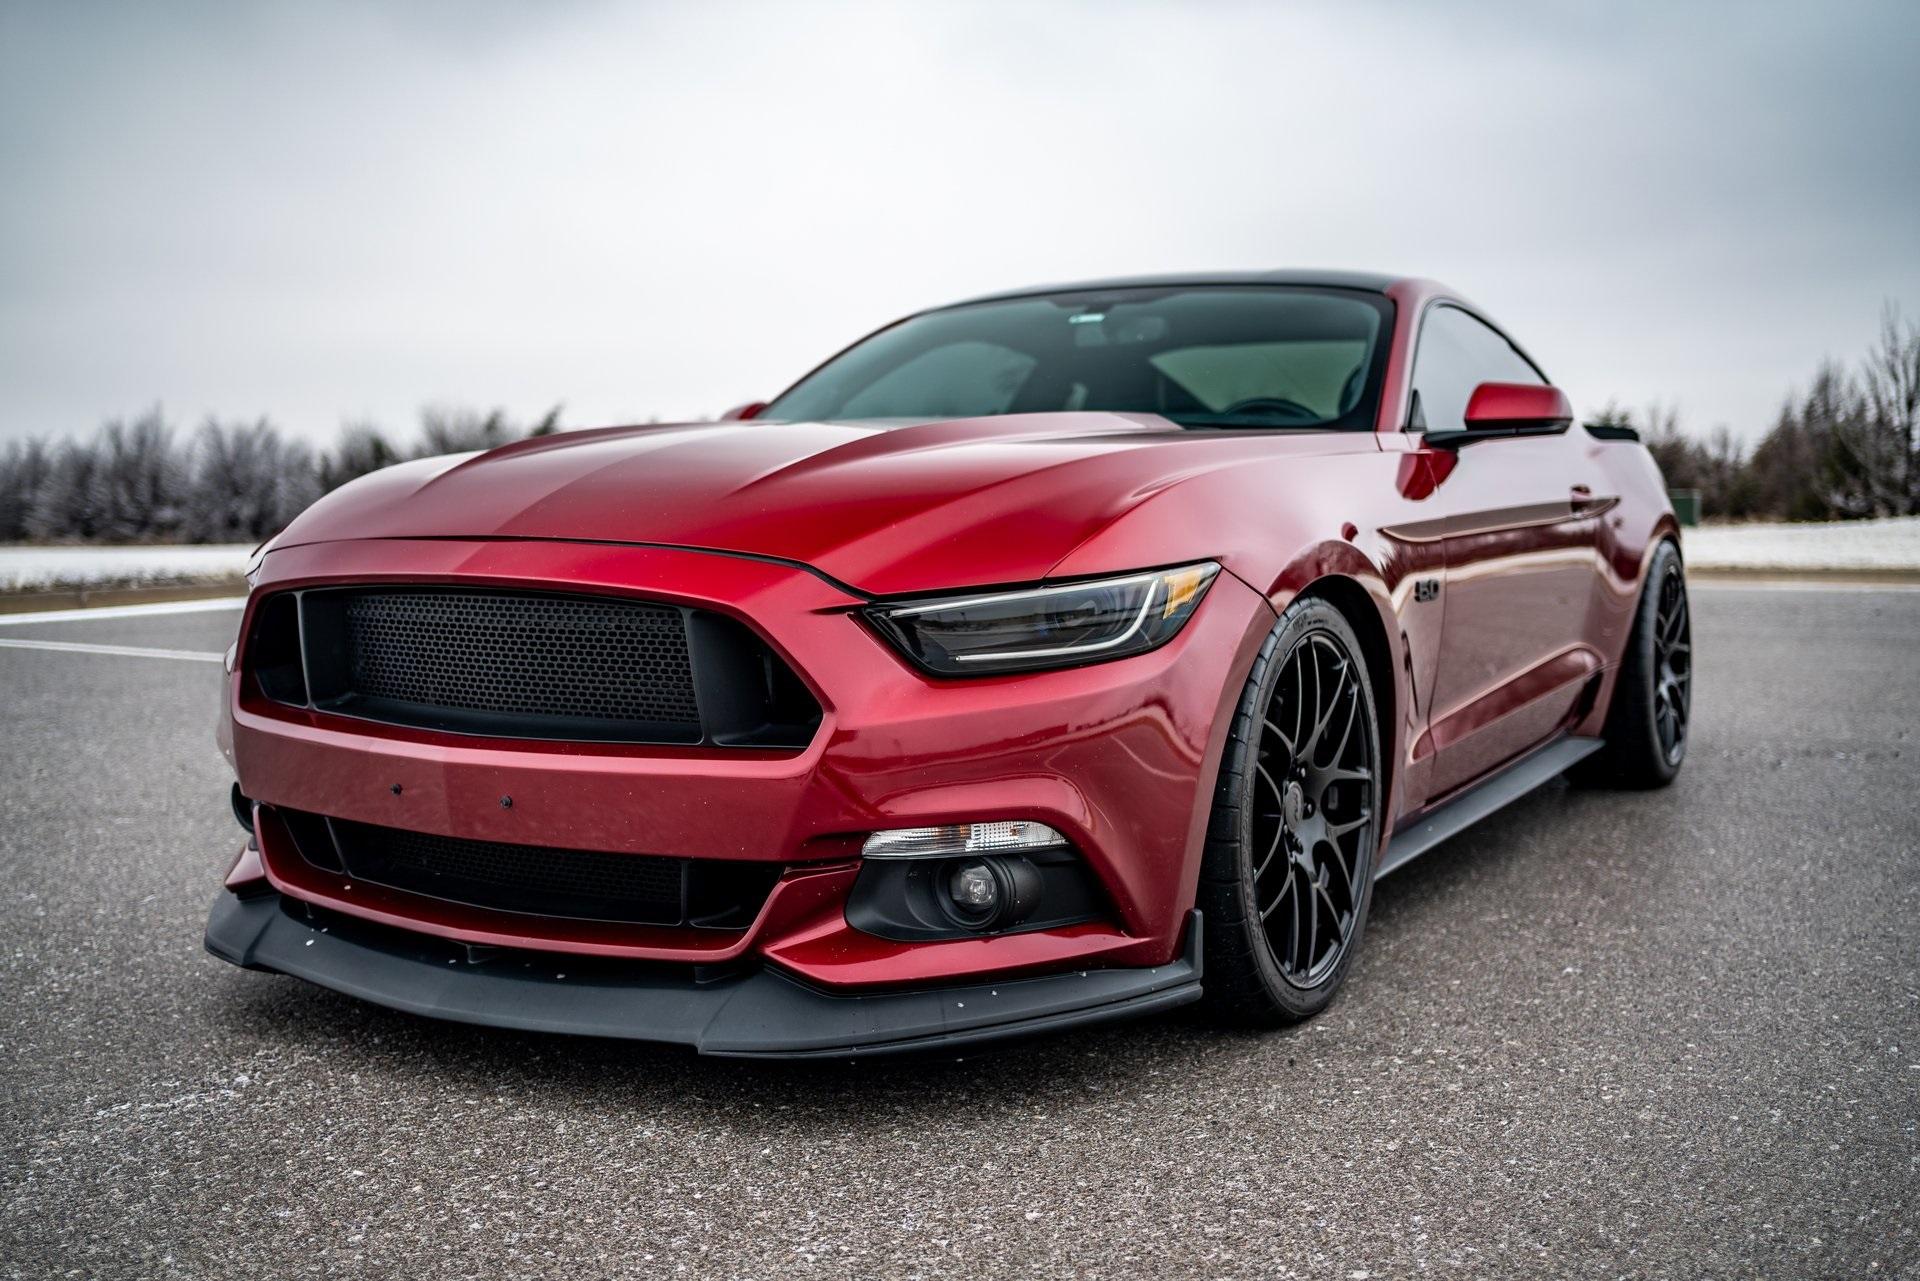 Mustang Of The Day: 2017 Ford Mustang GT